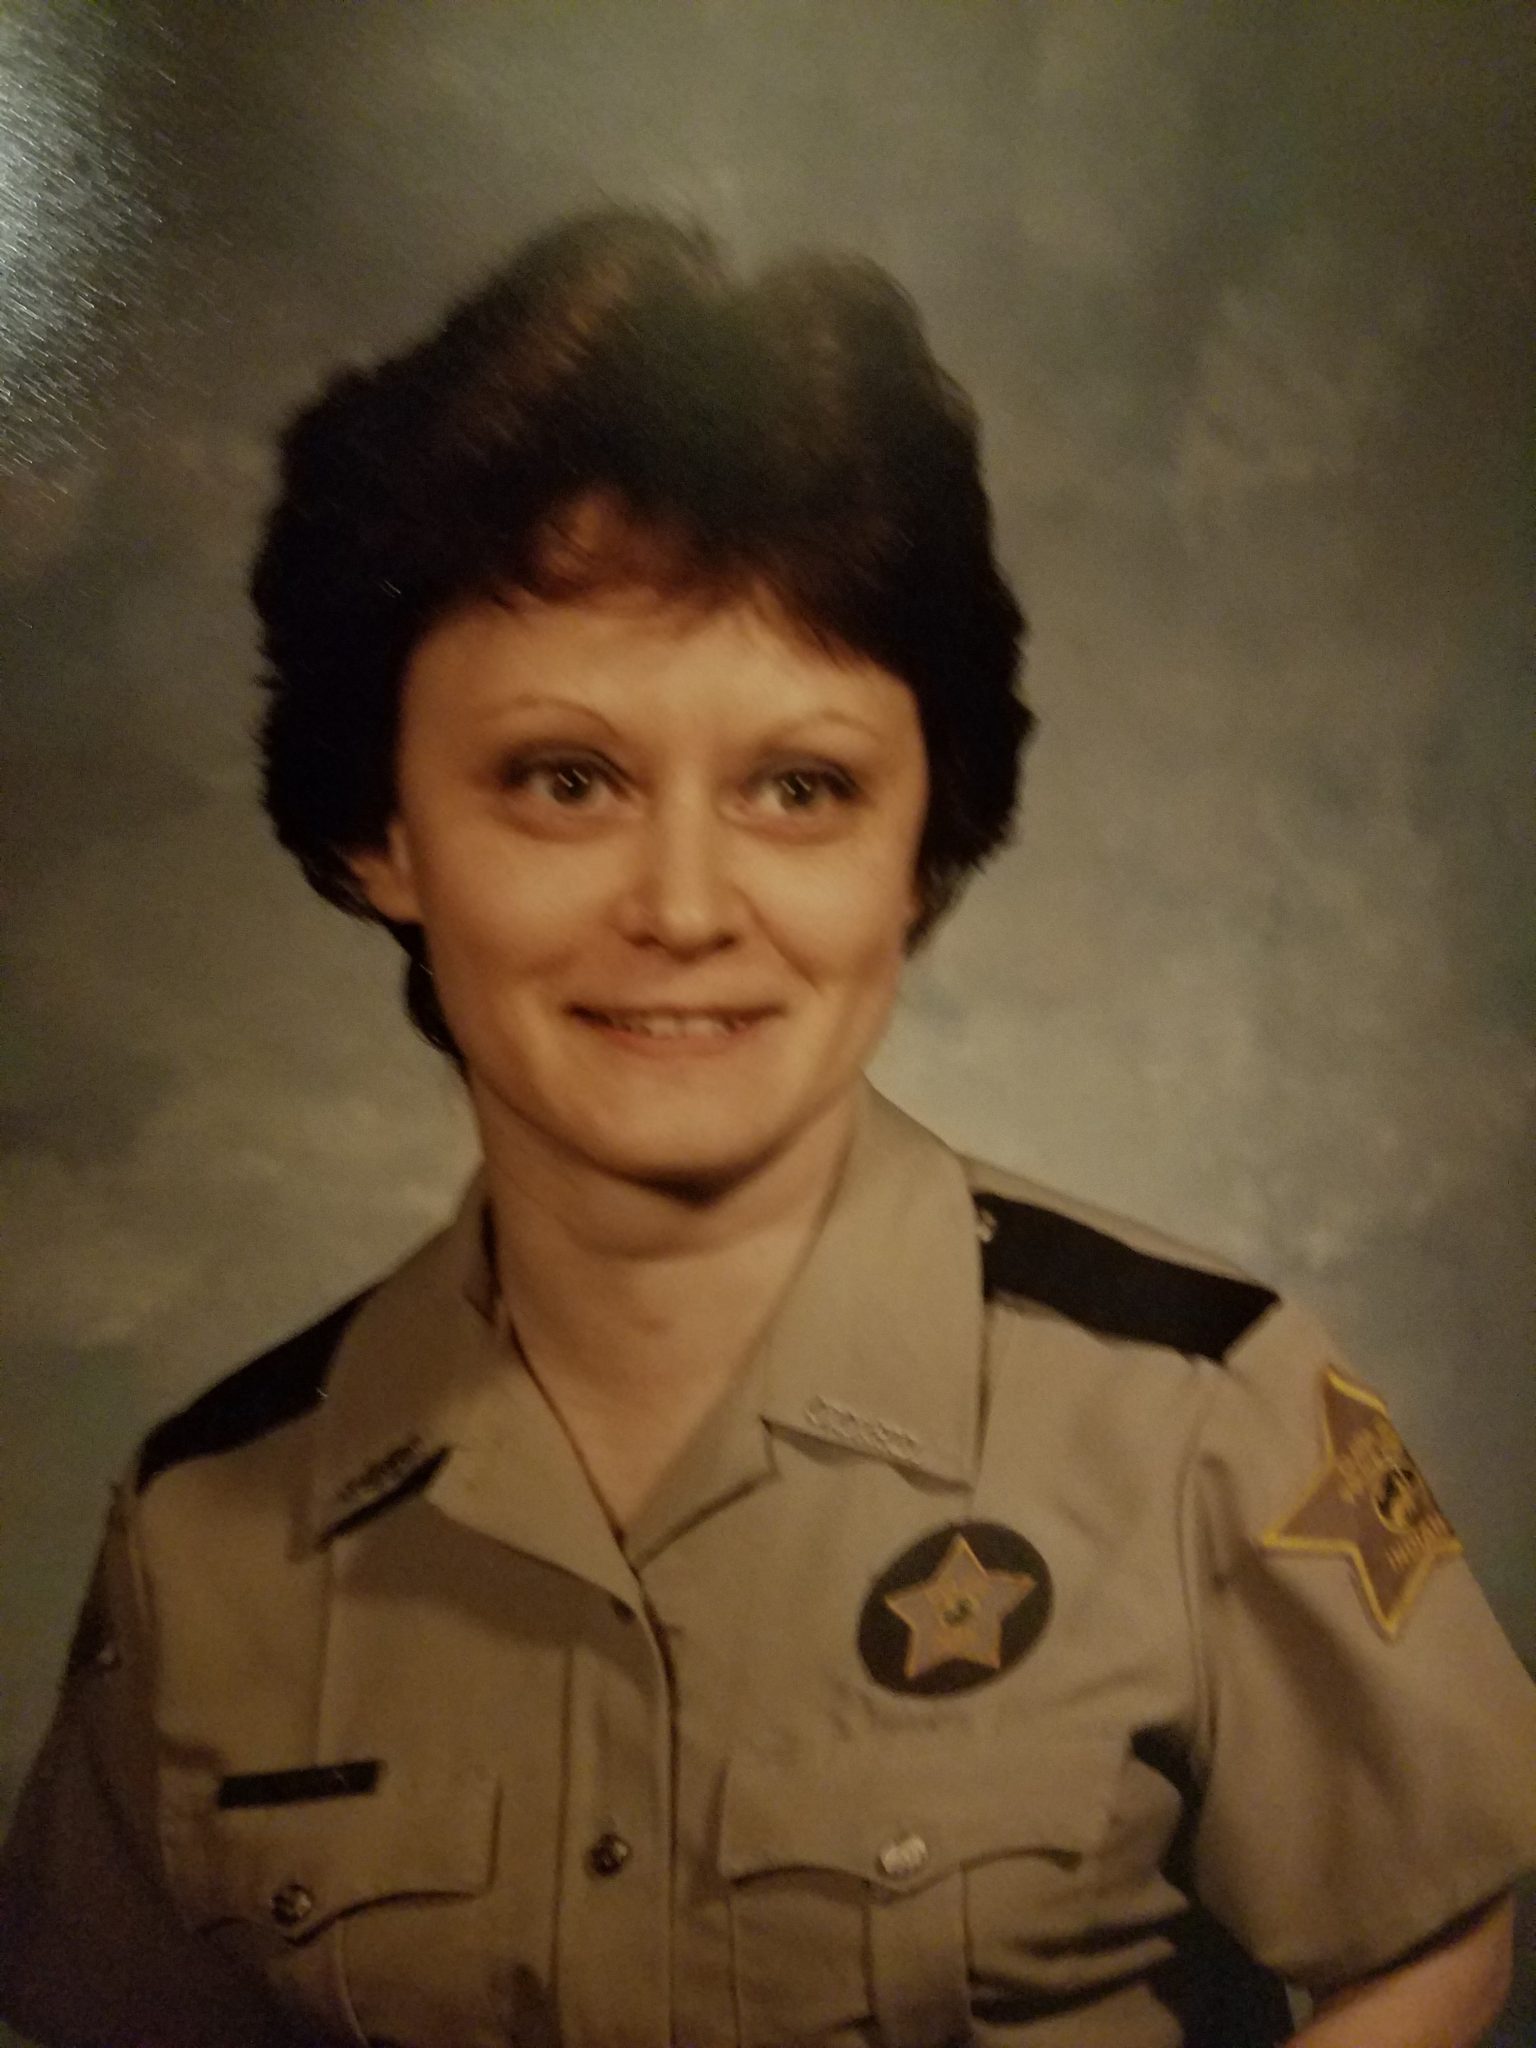 Rose Mary treasured being an Indiana deputy.